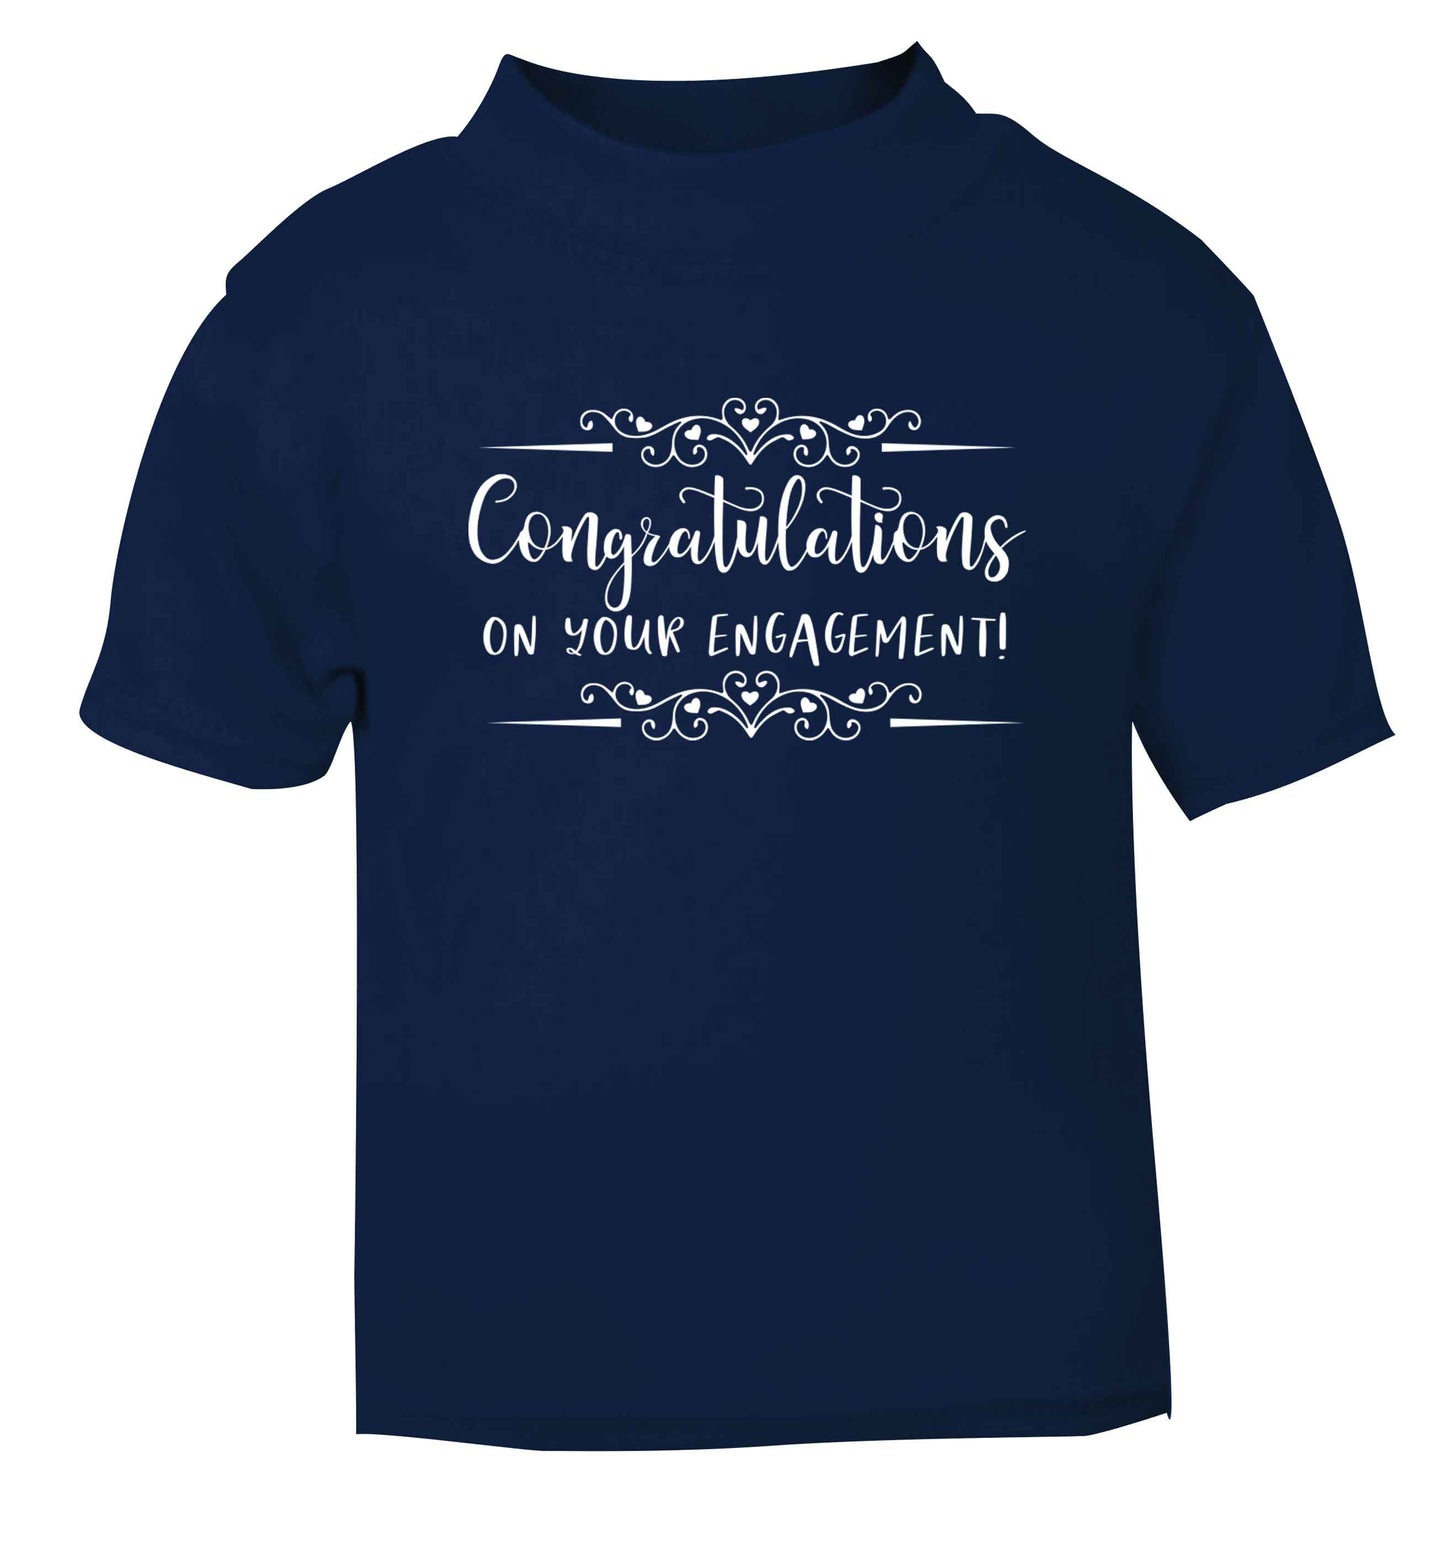 Congratulations on your engagement navy baby toddler Tshirt 2 Years